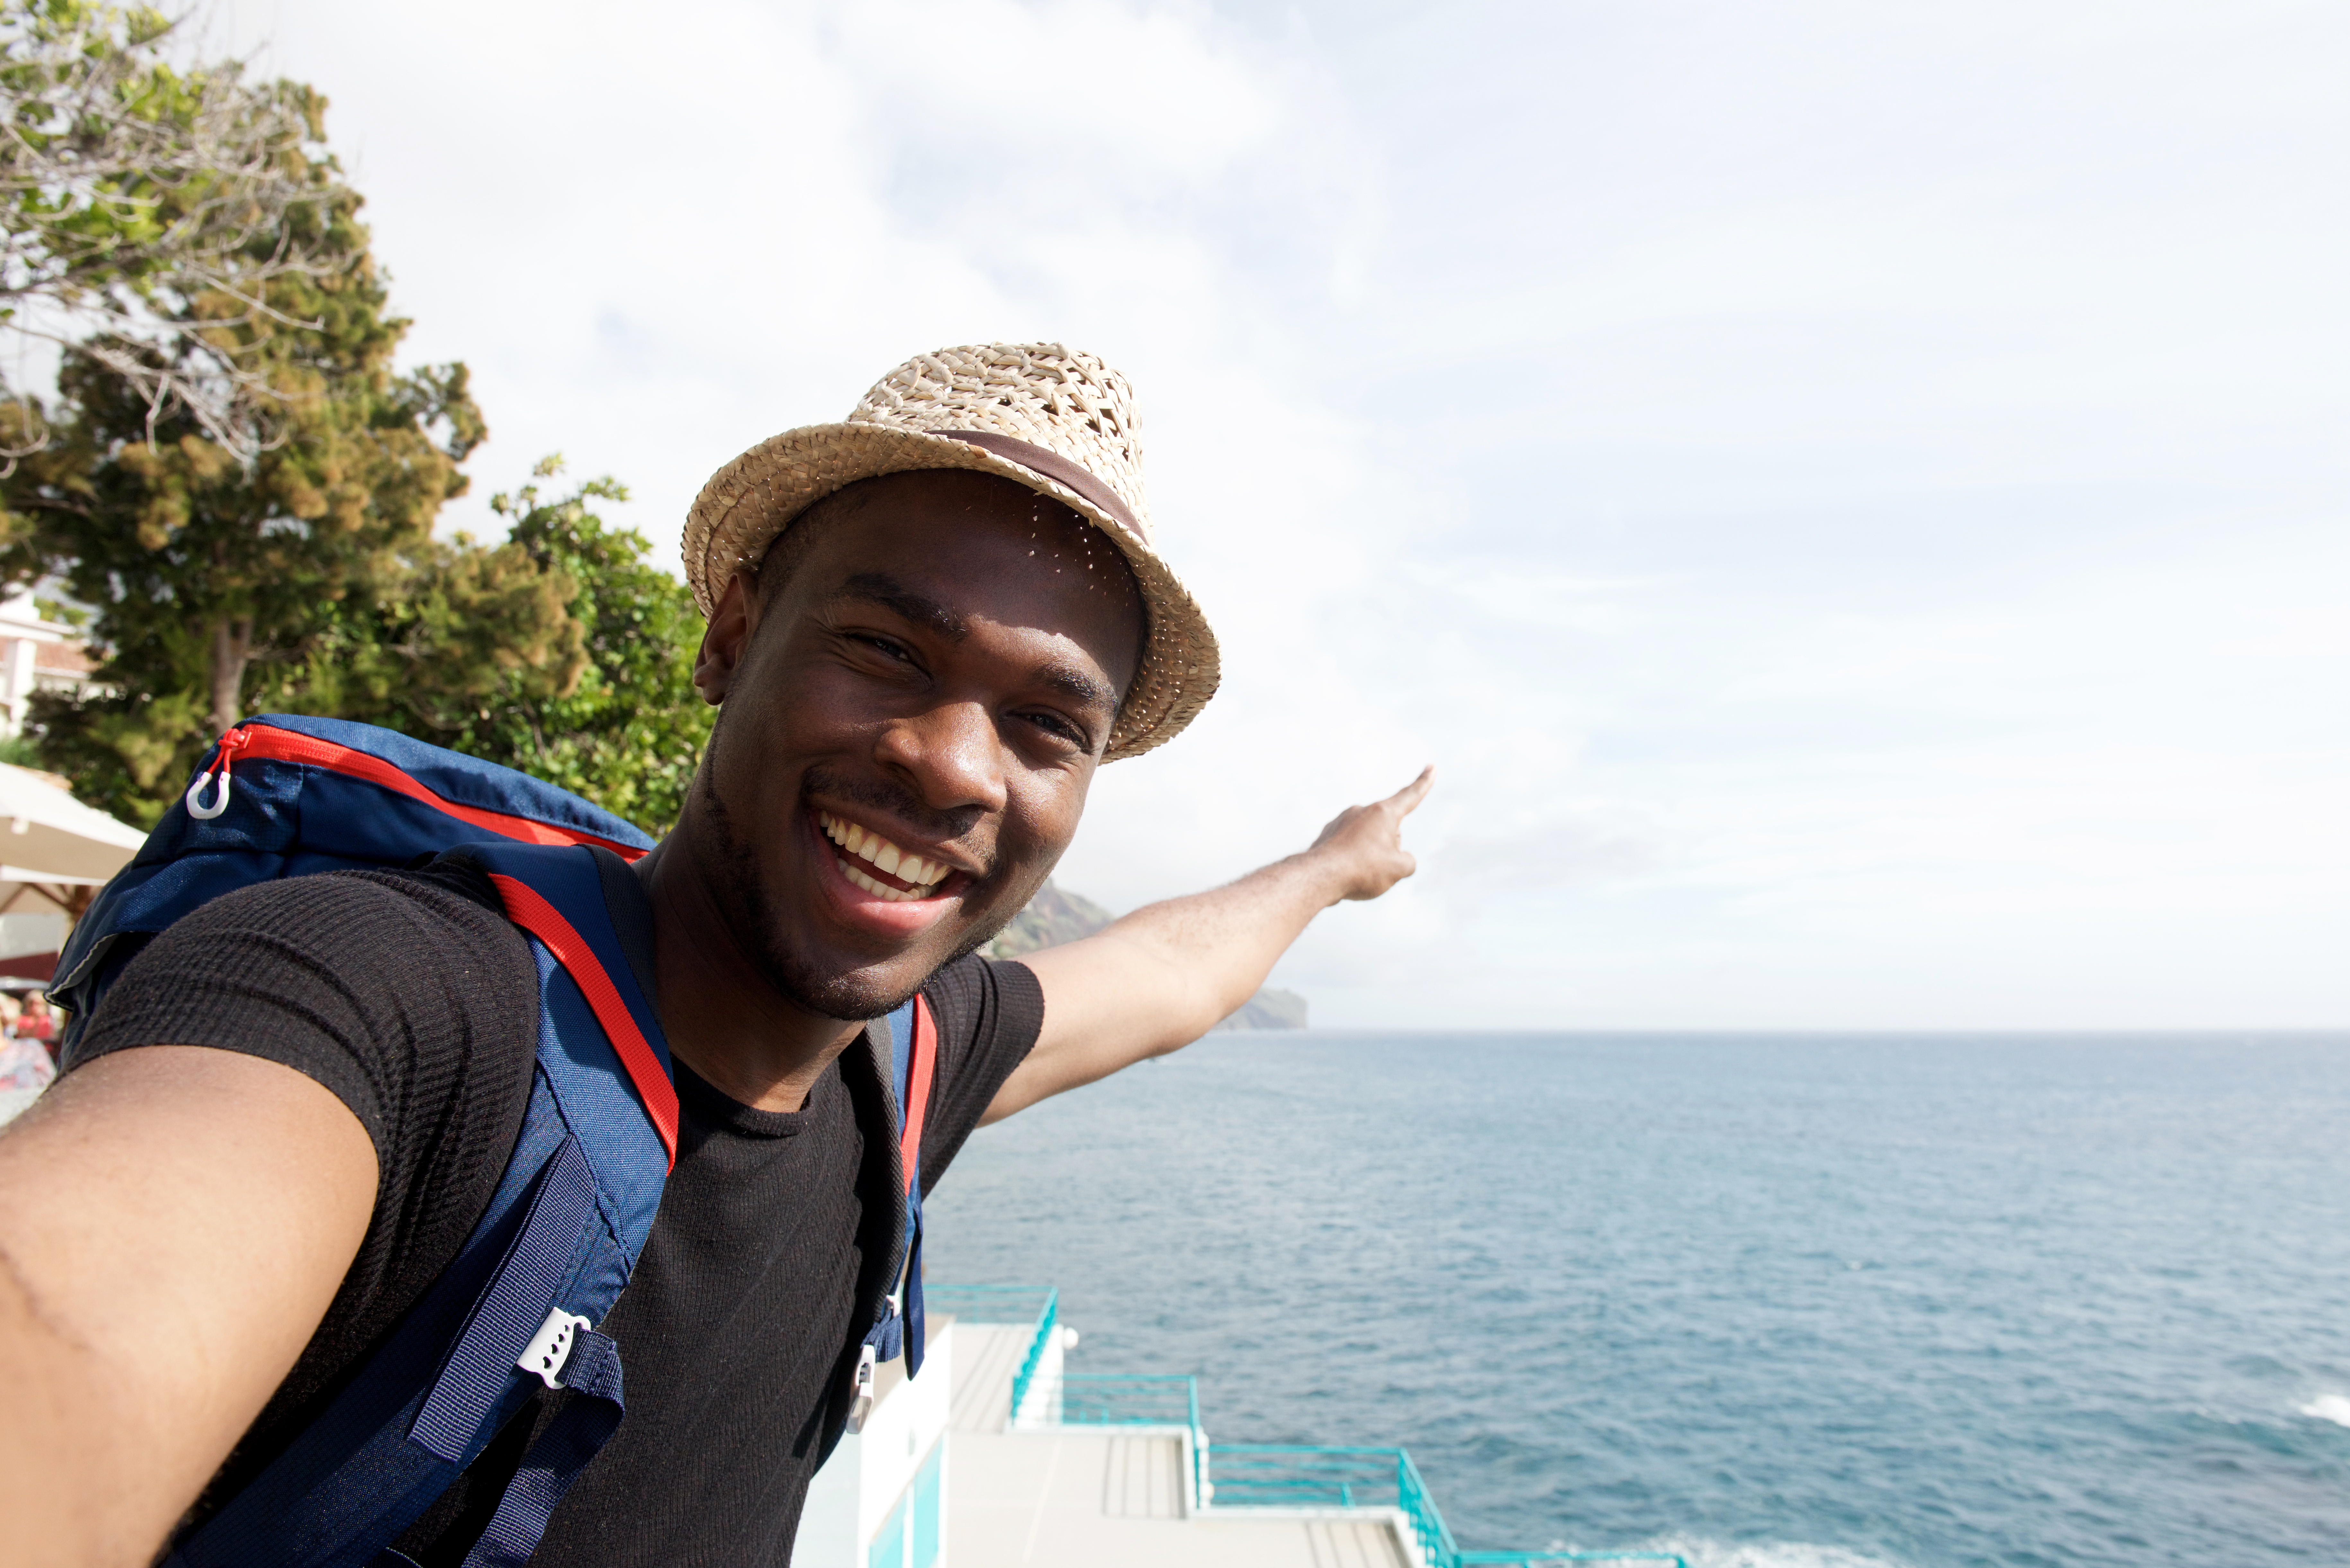 man taking selfie while on vacation in front of ocean